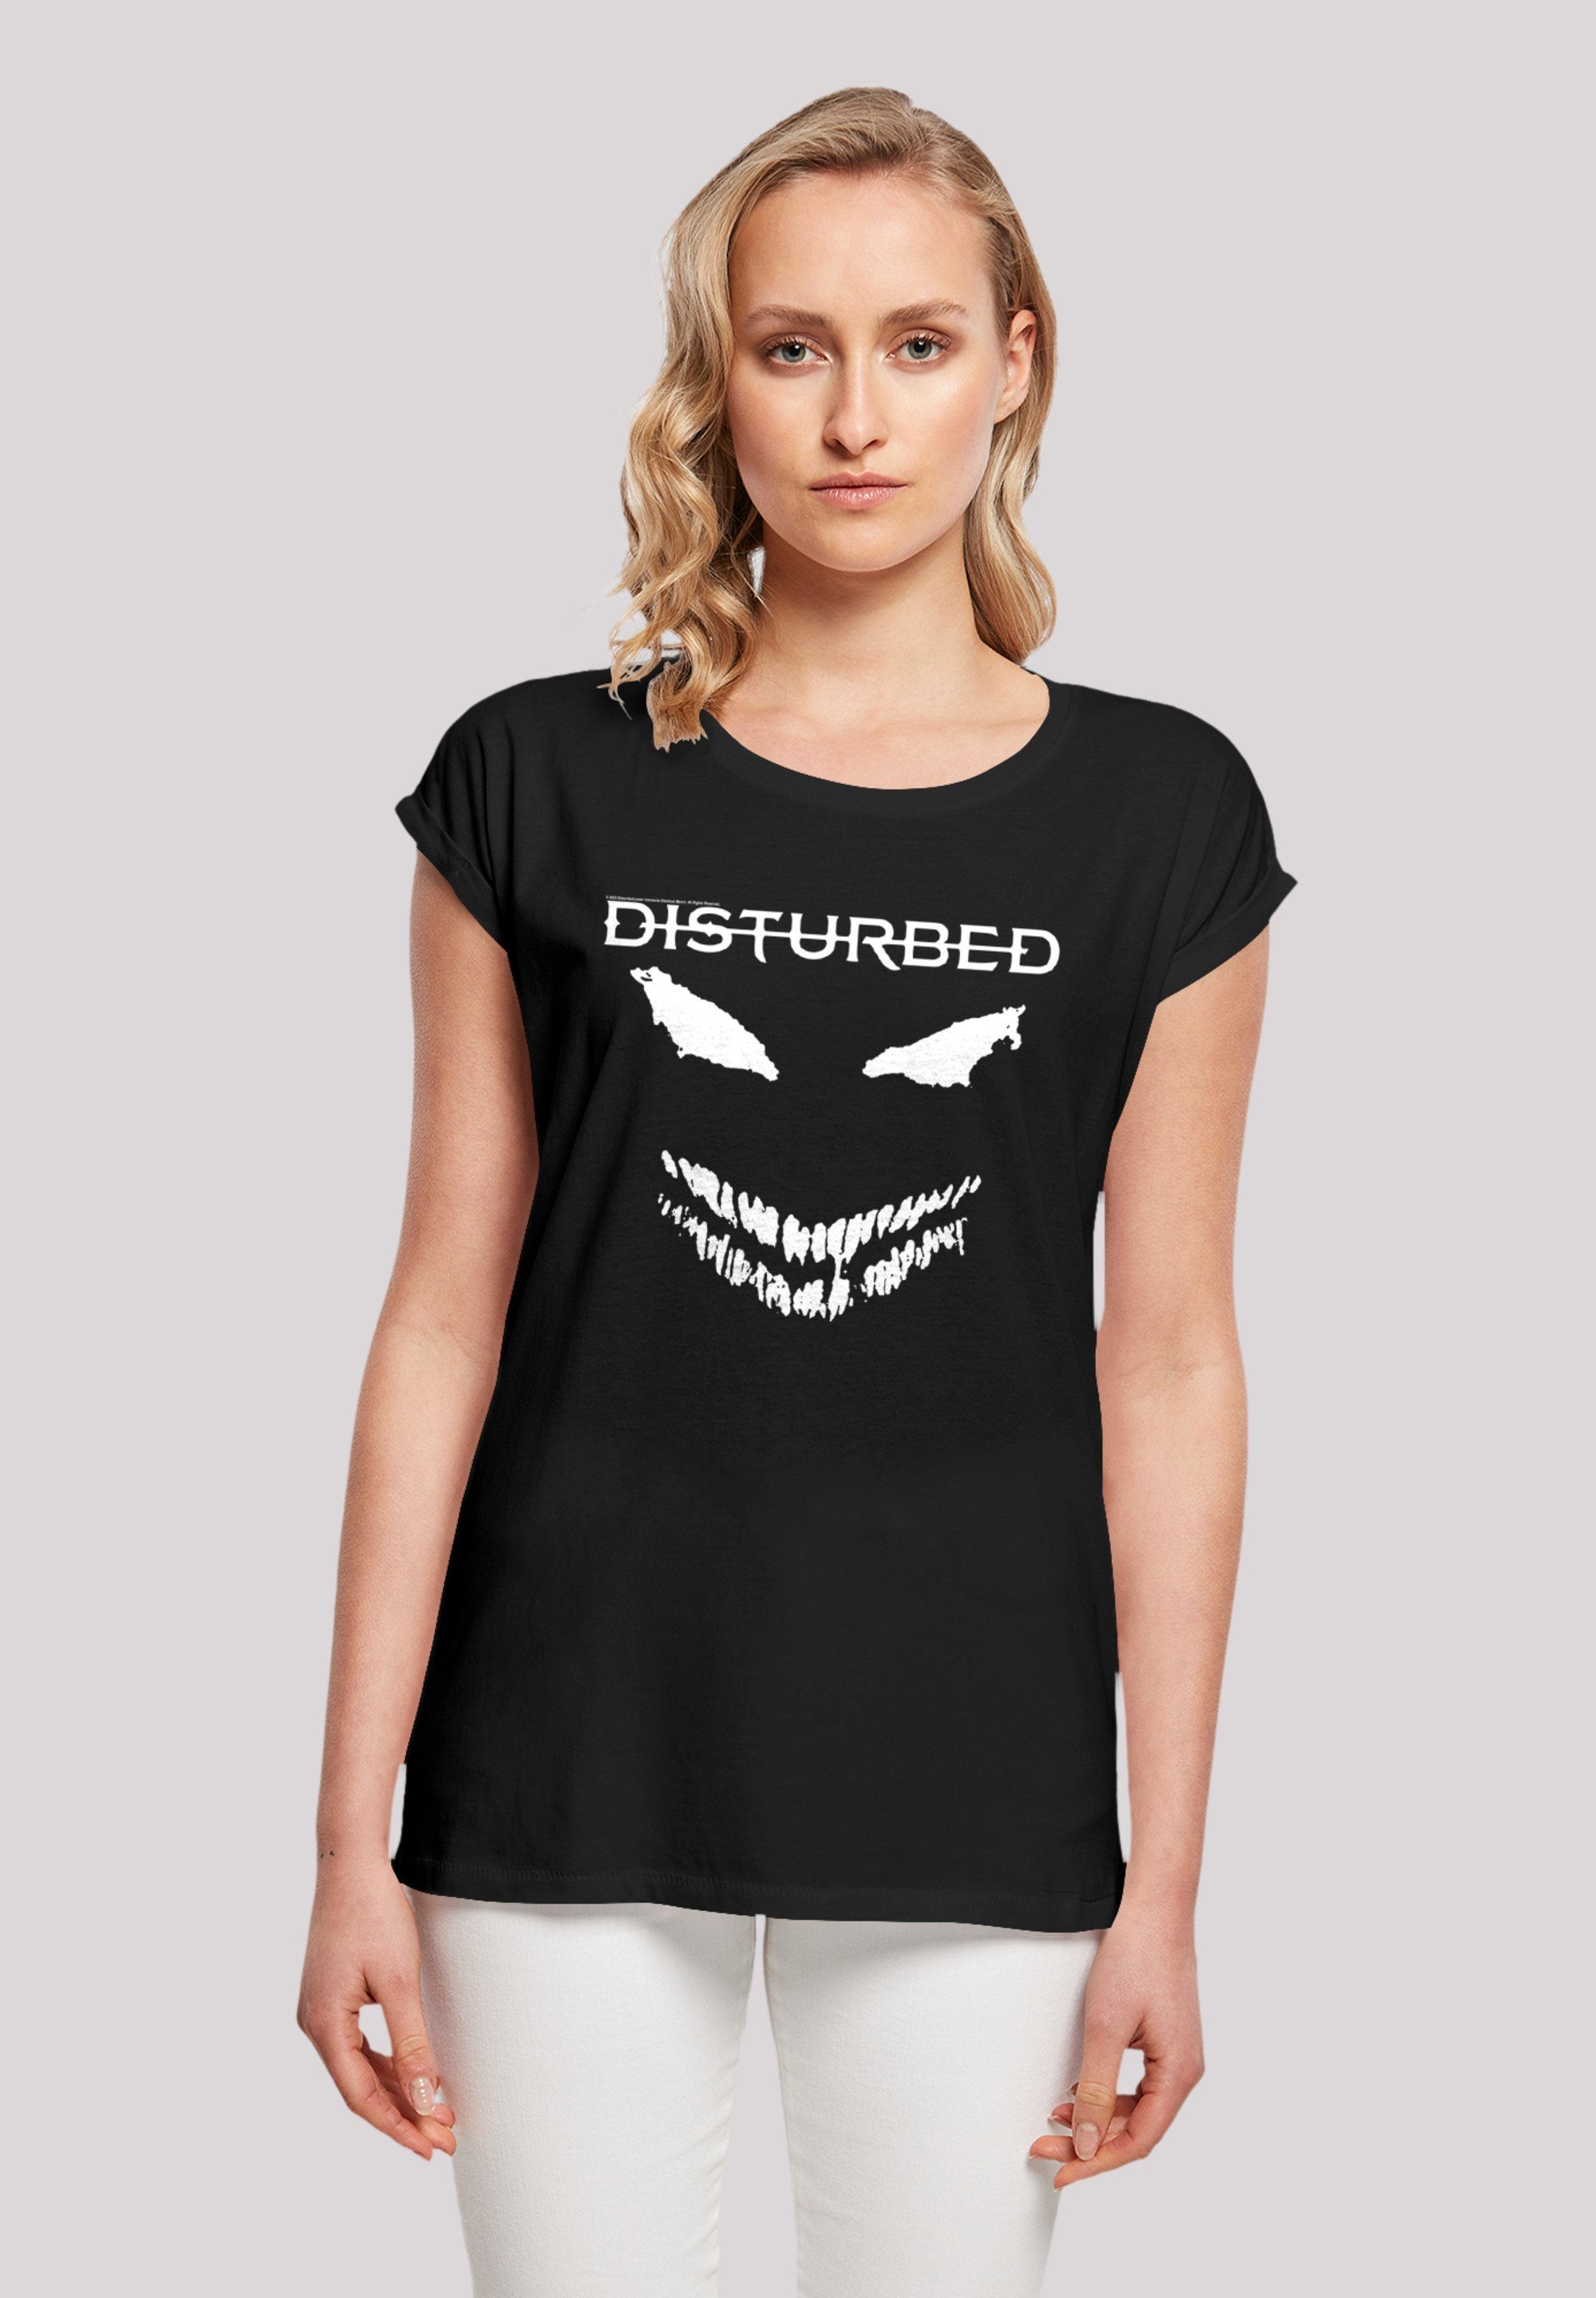 F4NT4STIC T-Shirt Disturbed Heavy Metal Scary Face Candle Premium Qualität, Rock-Musik, Band